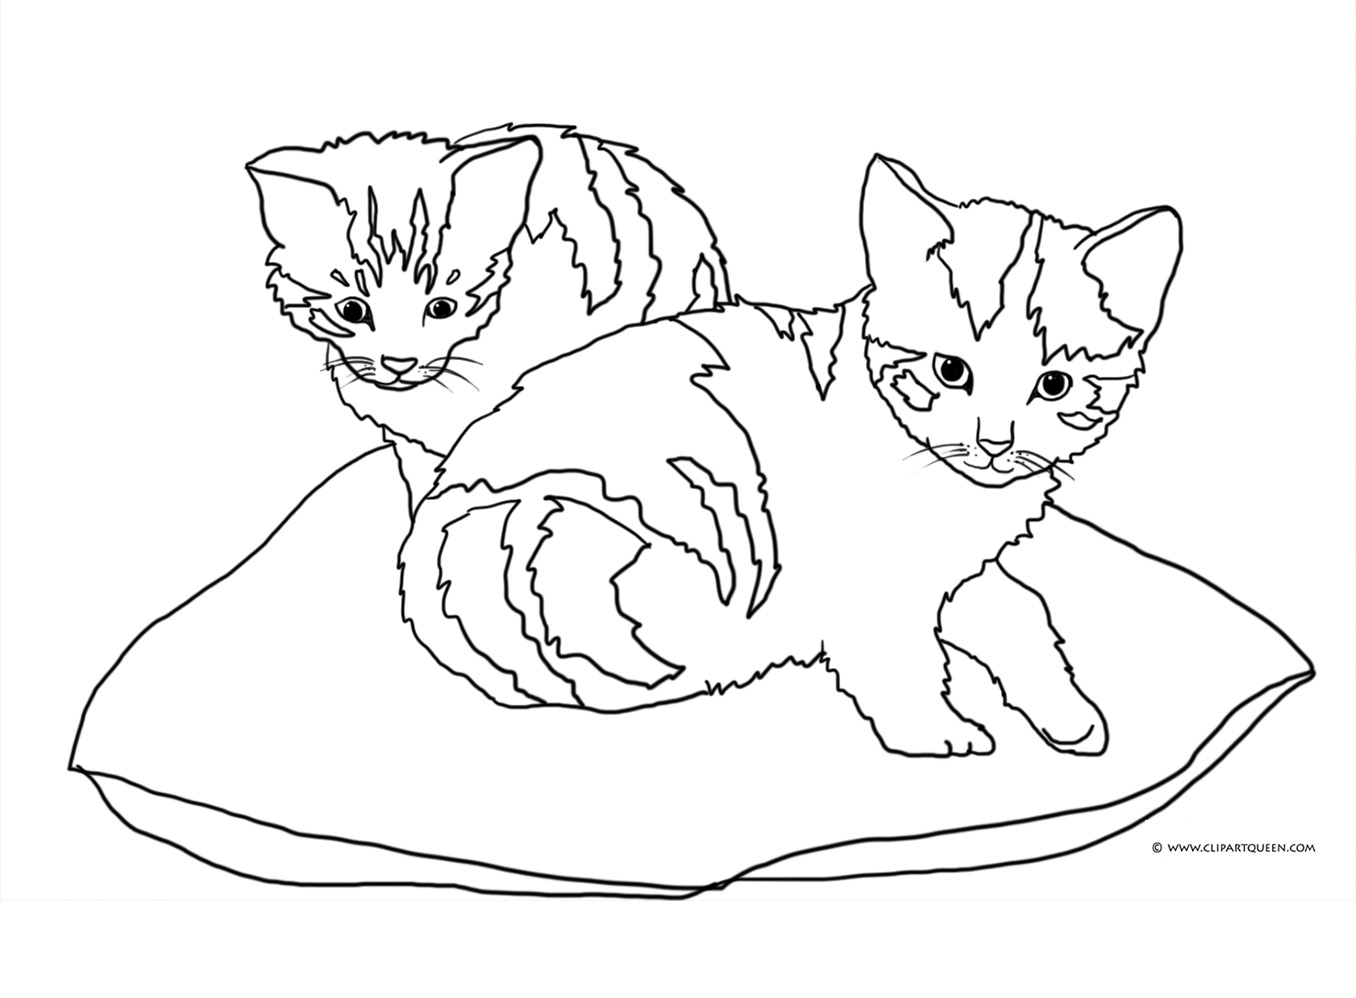 Exploding Kittens Coloring Pages : Coloring Pages Of Kittens